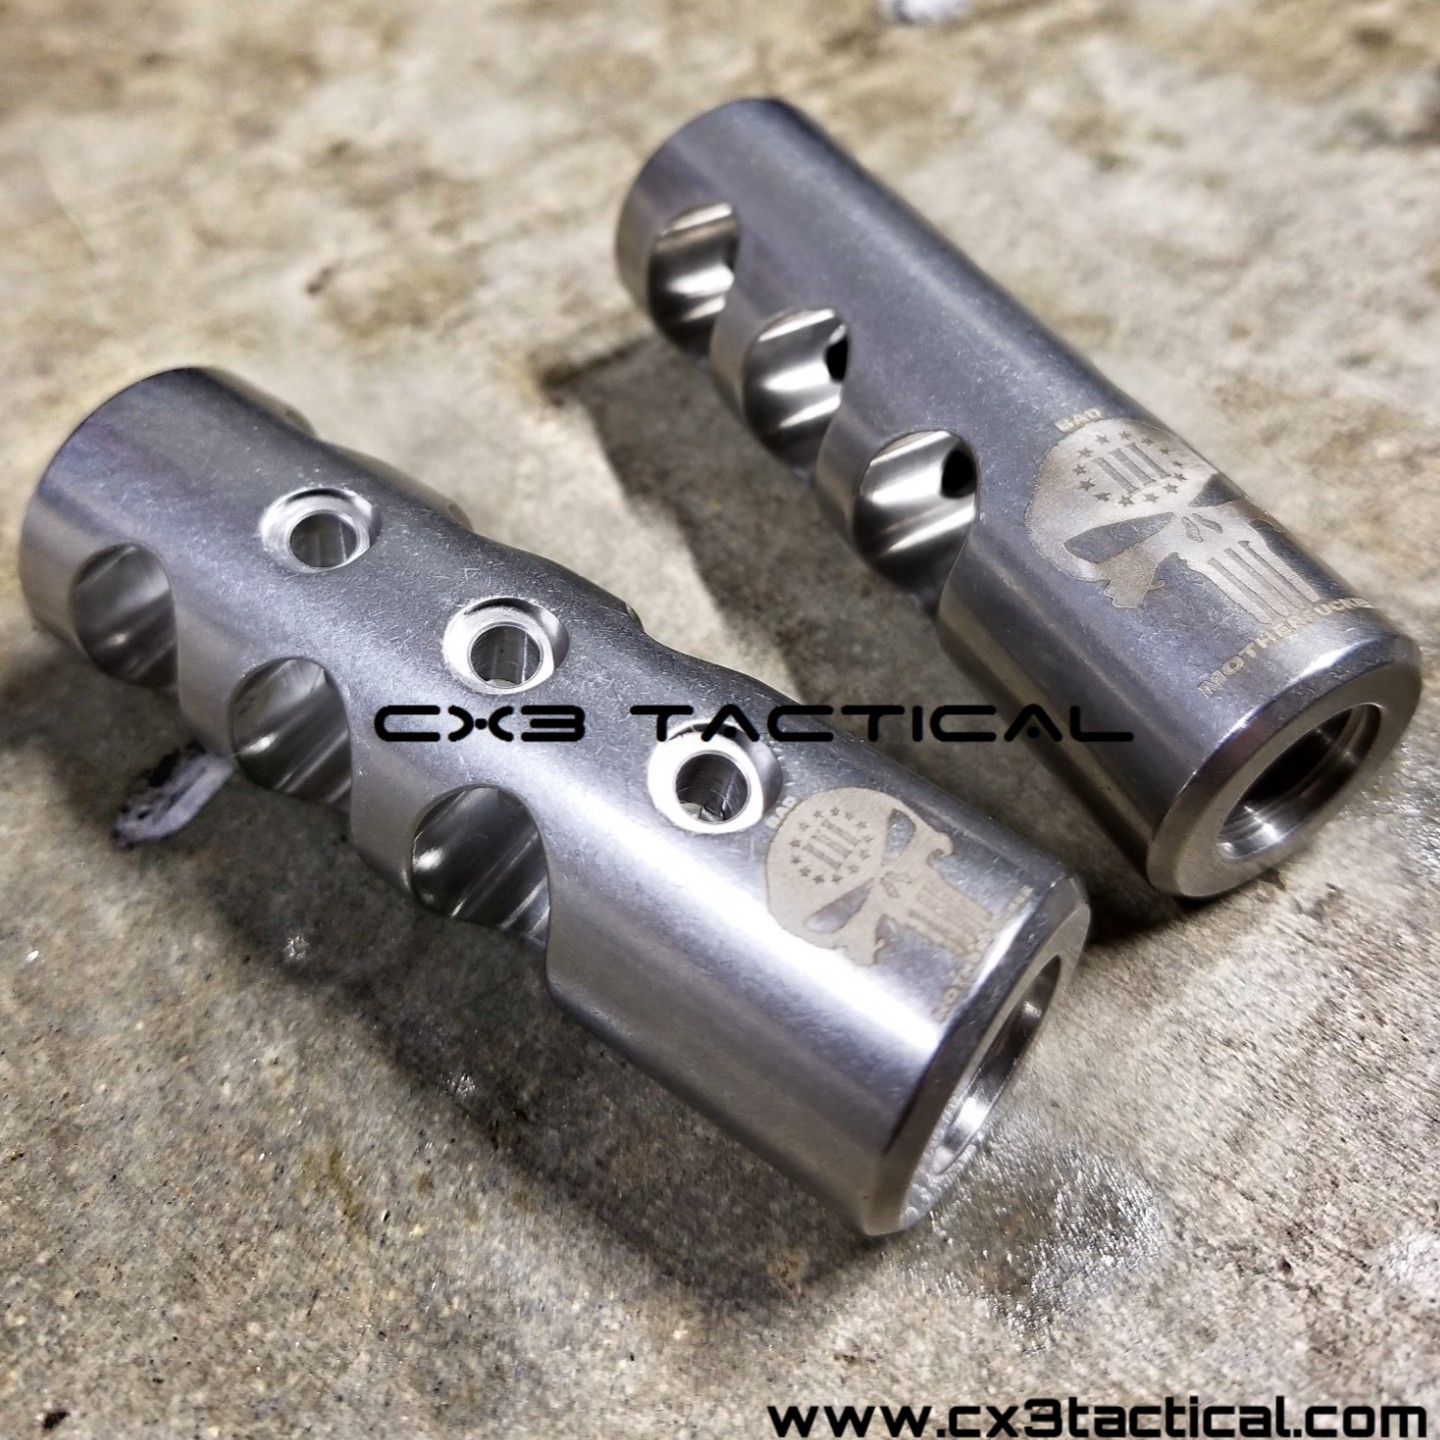 High Quality Stainless Up to .25 Caliber Muzzle Brake 1/2-28 TPI 